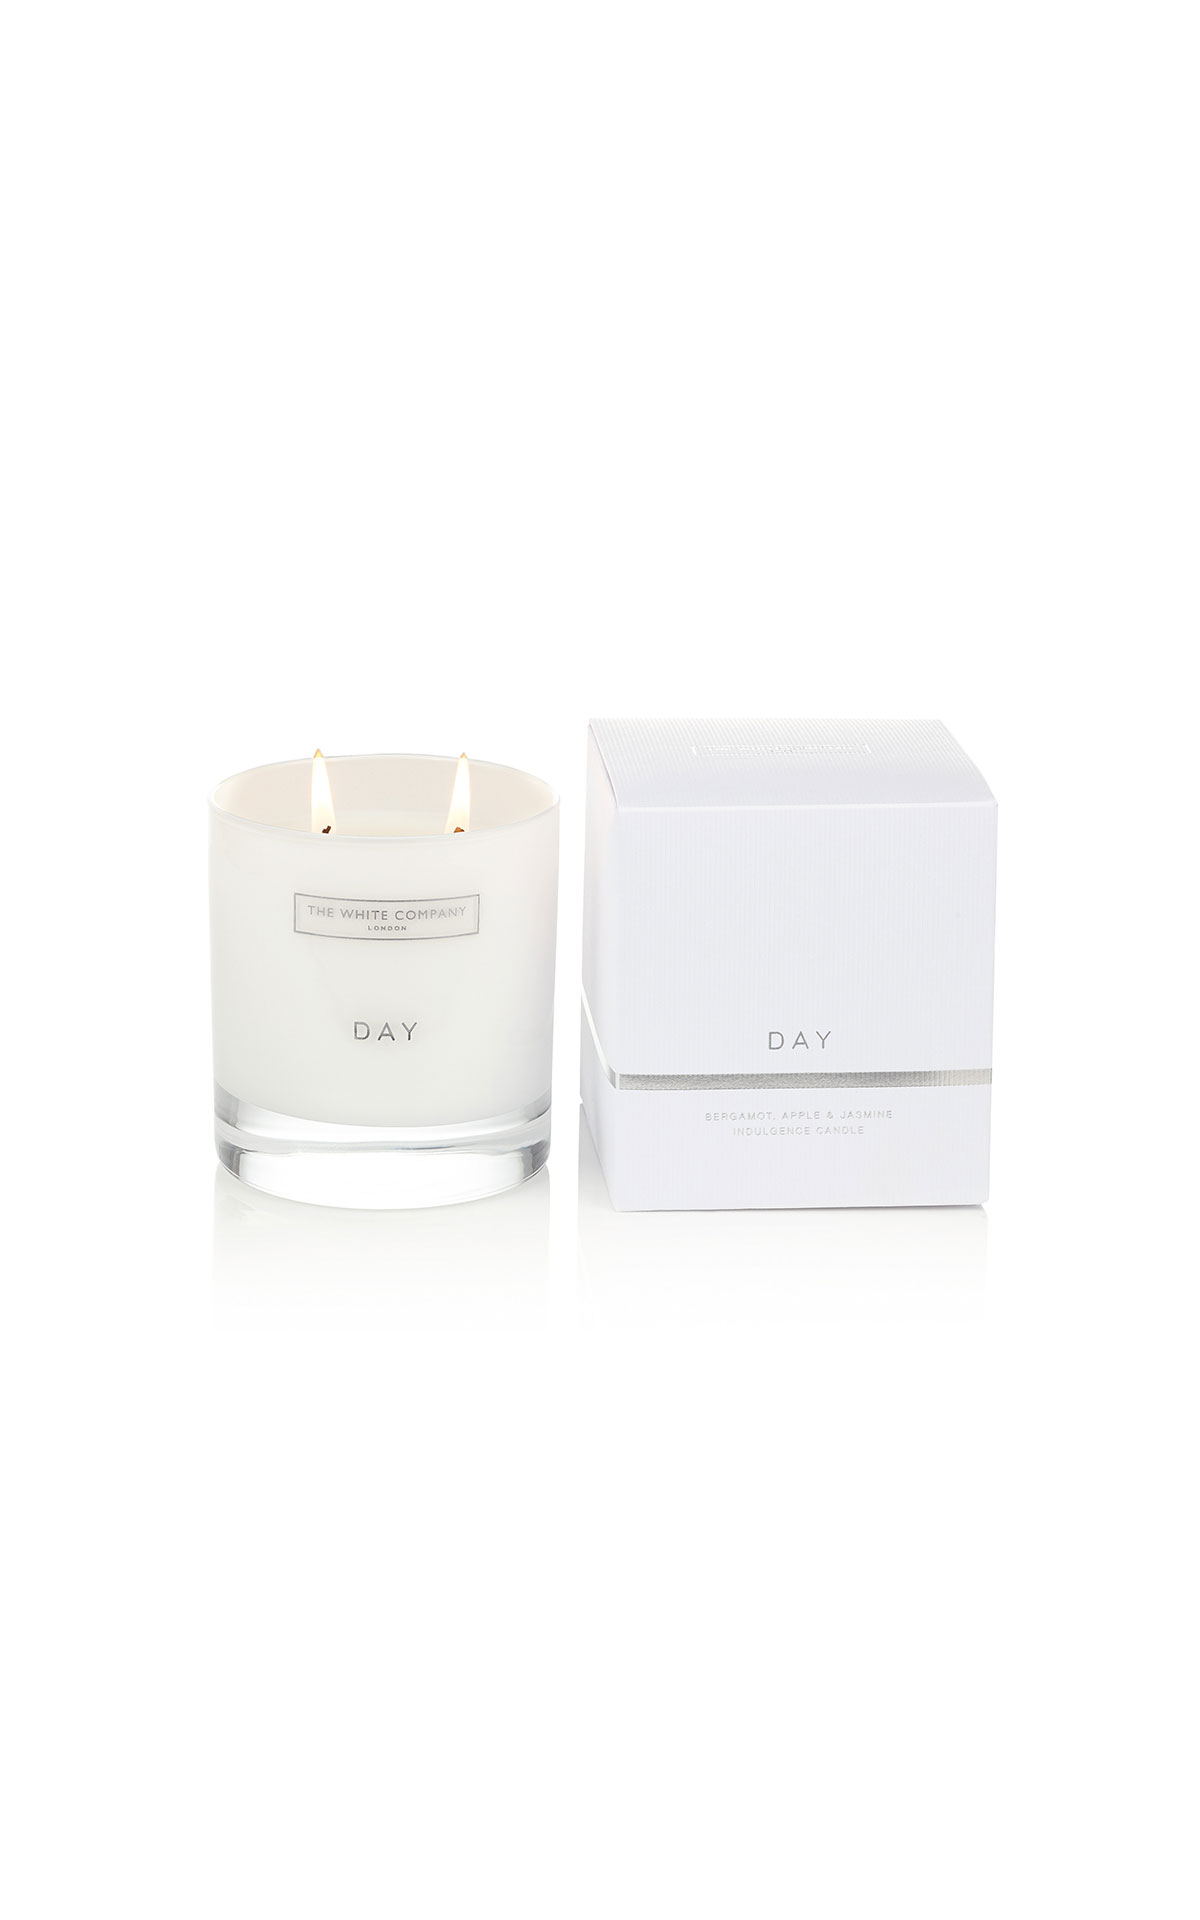 The White Company Day candle from Bicester Village